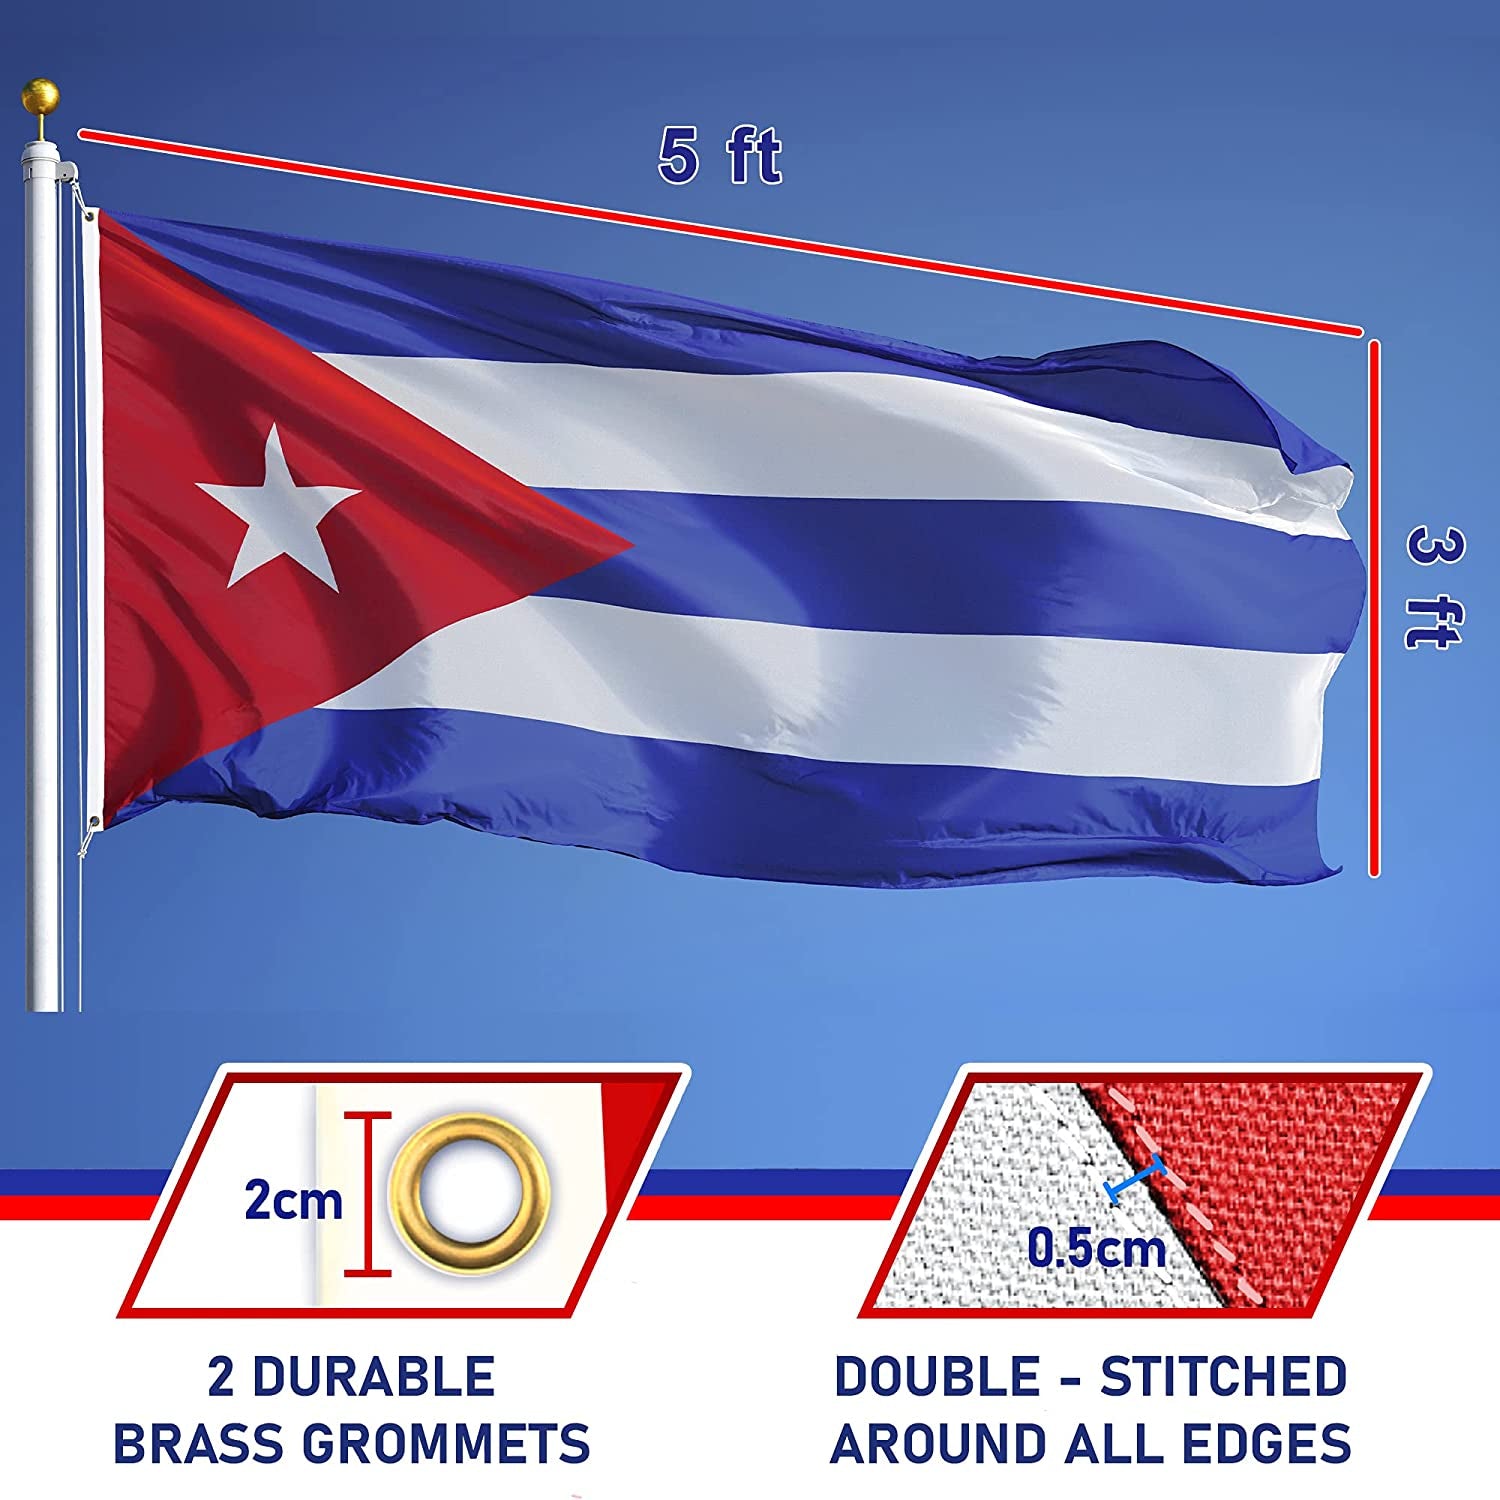 Eugenys, Eugenys Cuba Flag 3X5 Foot - Cuban National Flag Polyester -Bright Vivid Colors, Double Stitched, Durable Brass Grommets - Perfect Cuban Flags for Indoor / Outdoor